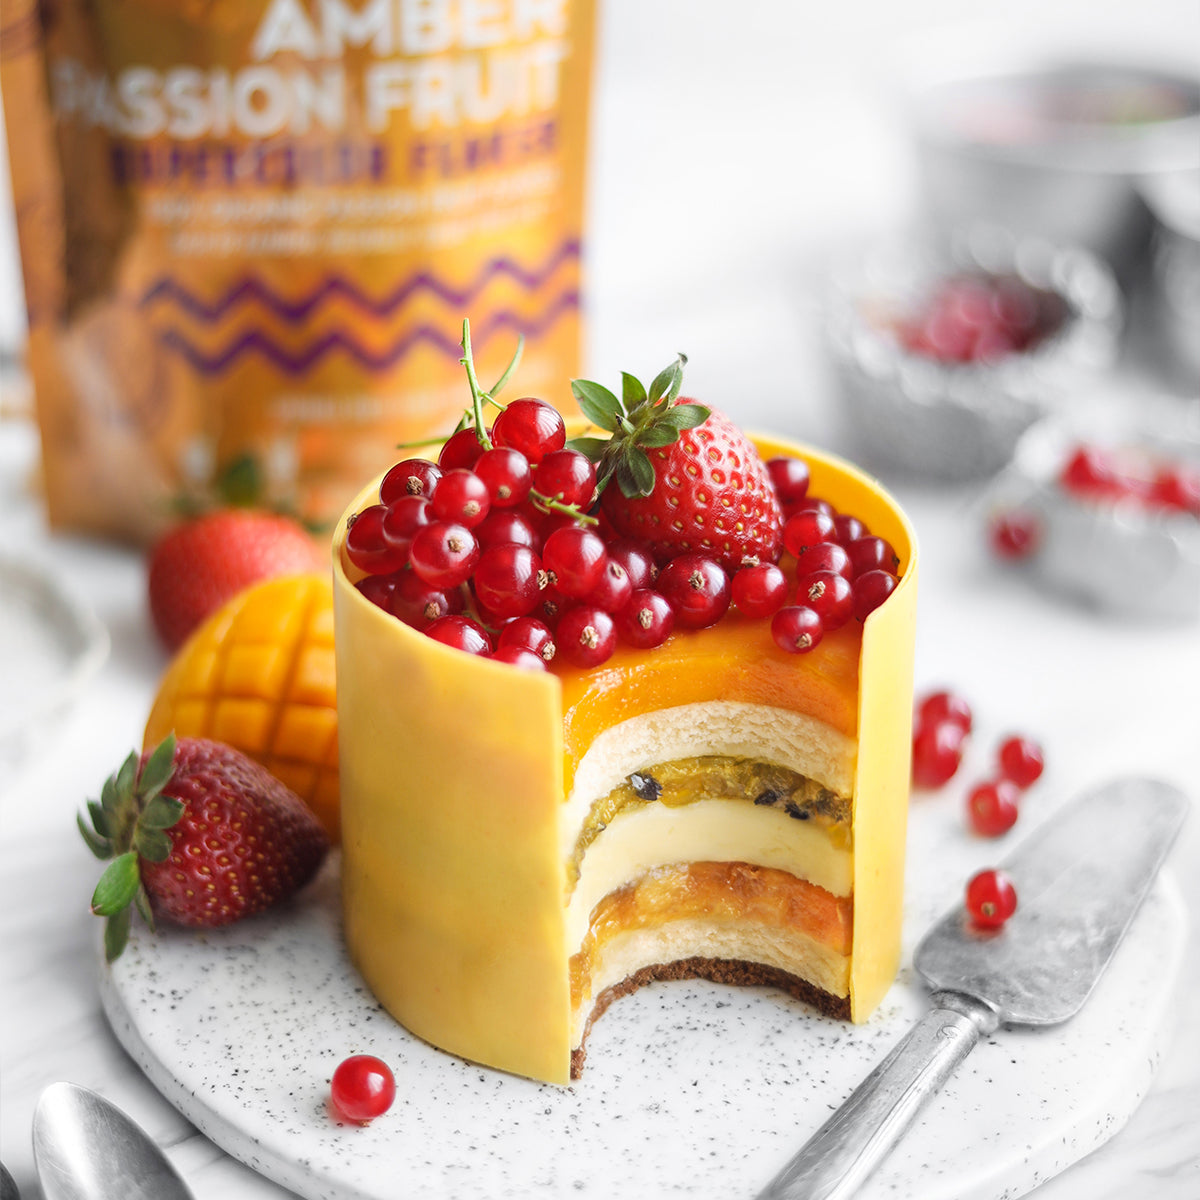 https://cdn.shopify.com/s/files/1/1921/3233/articles/SUNCORE_FOODS_TROPICAL_PASSION_FRUIT_LAYER_CAKE.jpg?v=1598244412